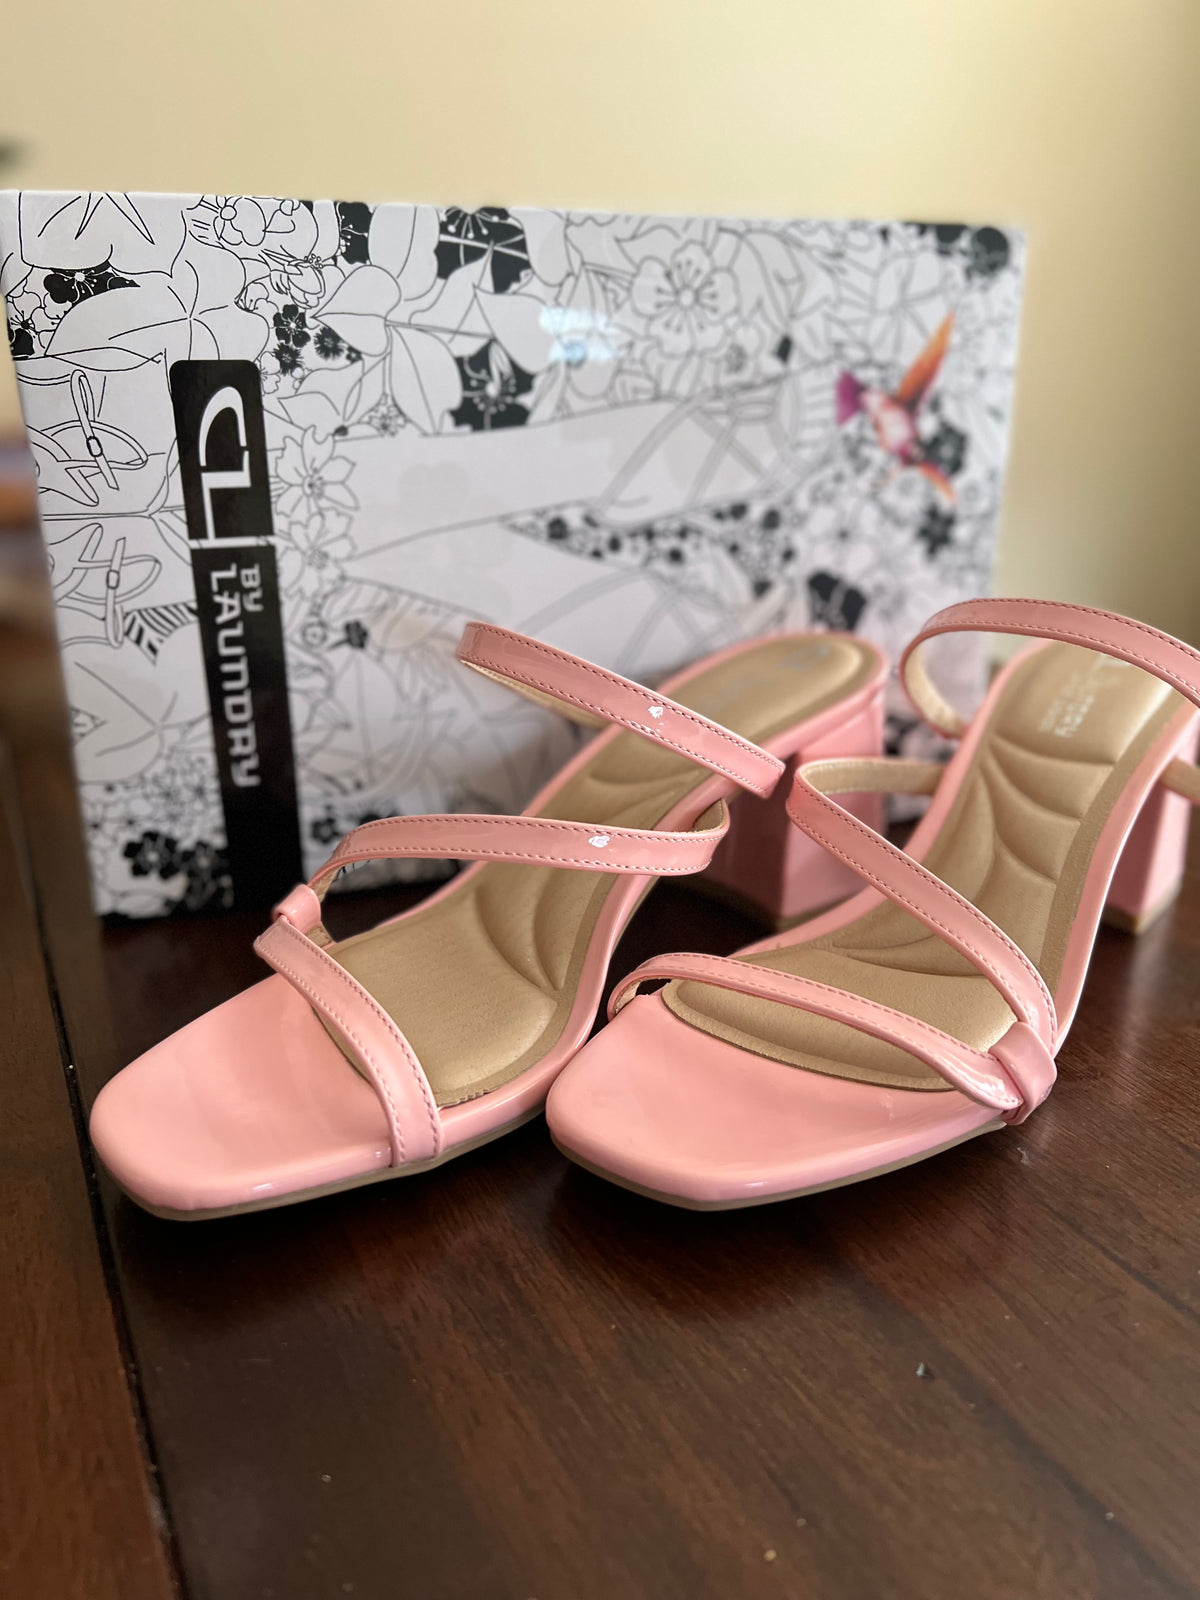 Blaine Blush Strappy Heels By Chinese Laundry